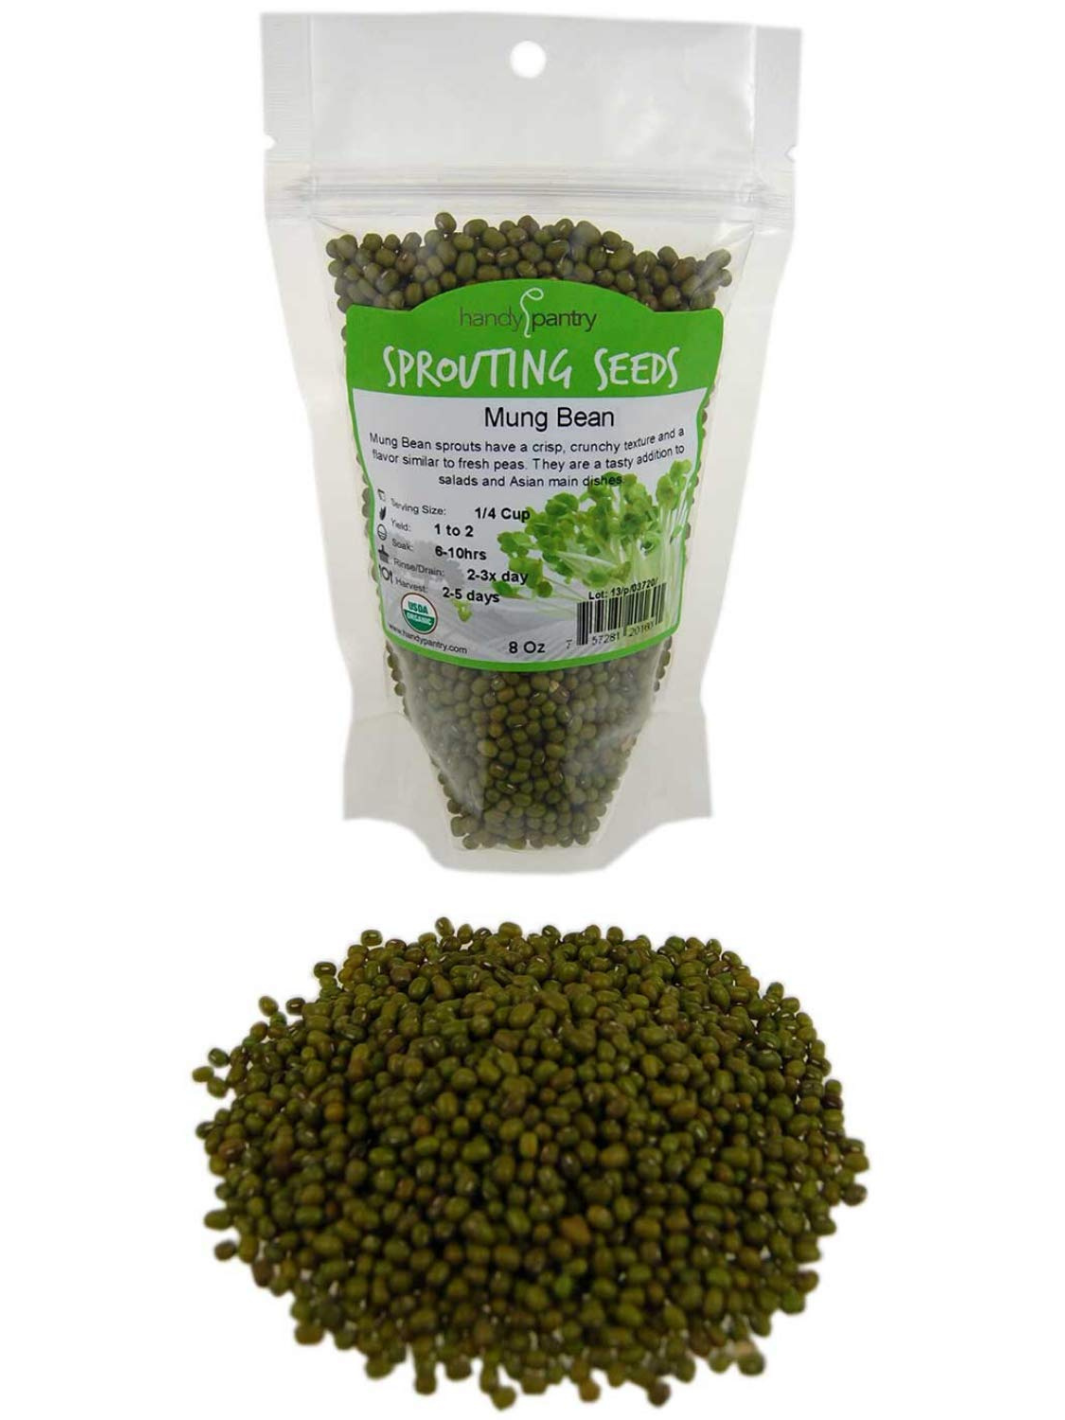 Handy Pantry Organic Mung Beans for Sprouting in 8oz Bag